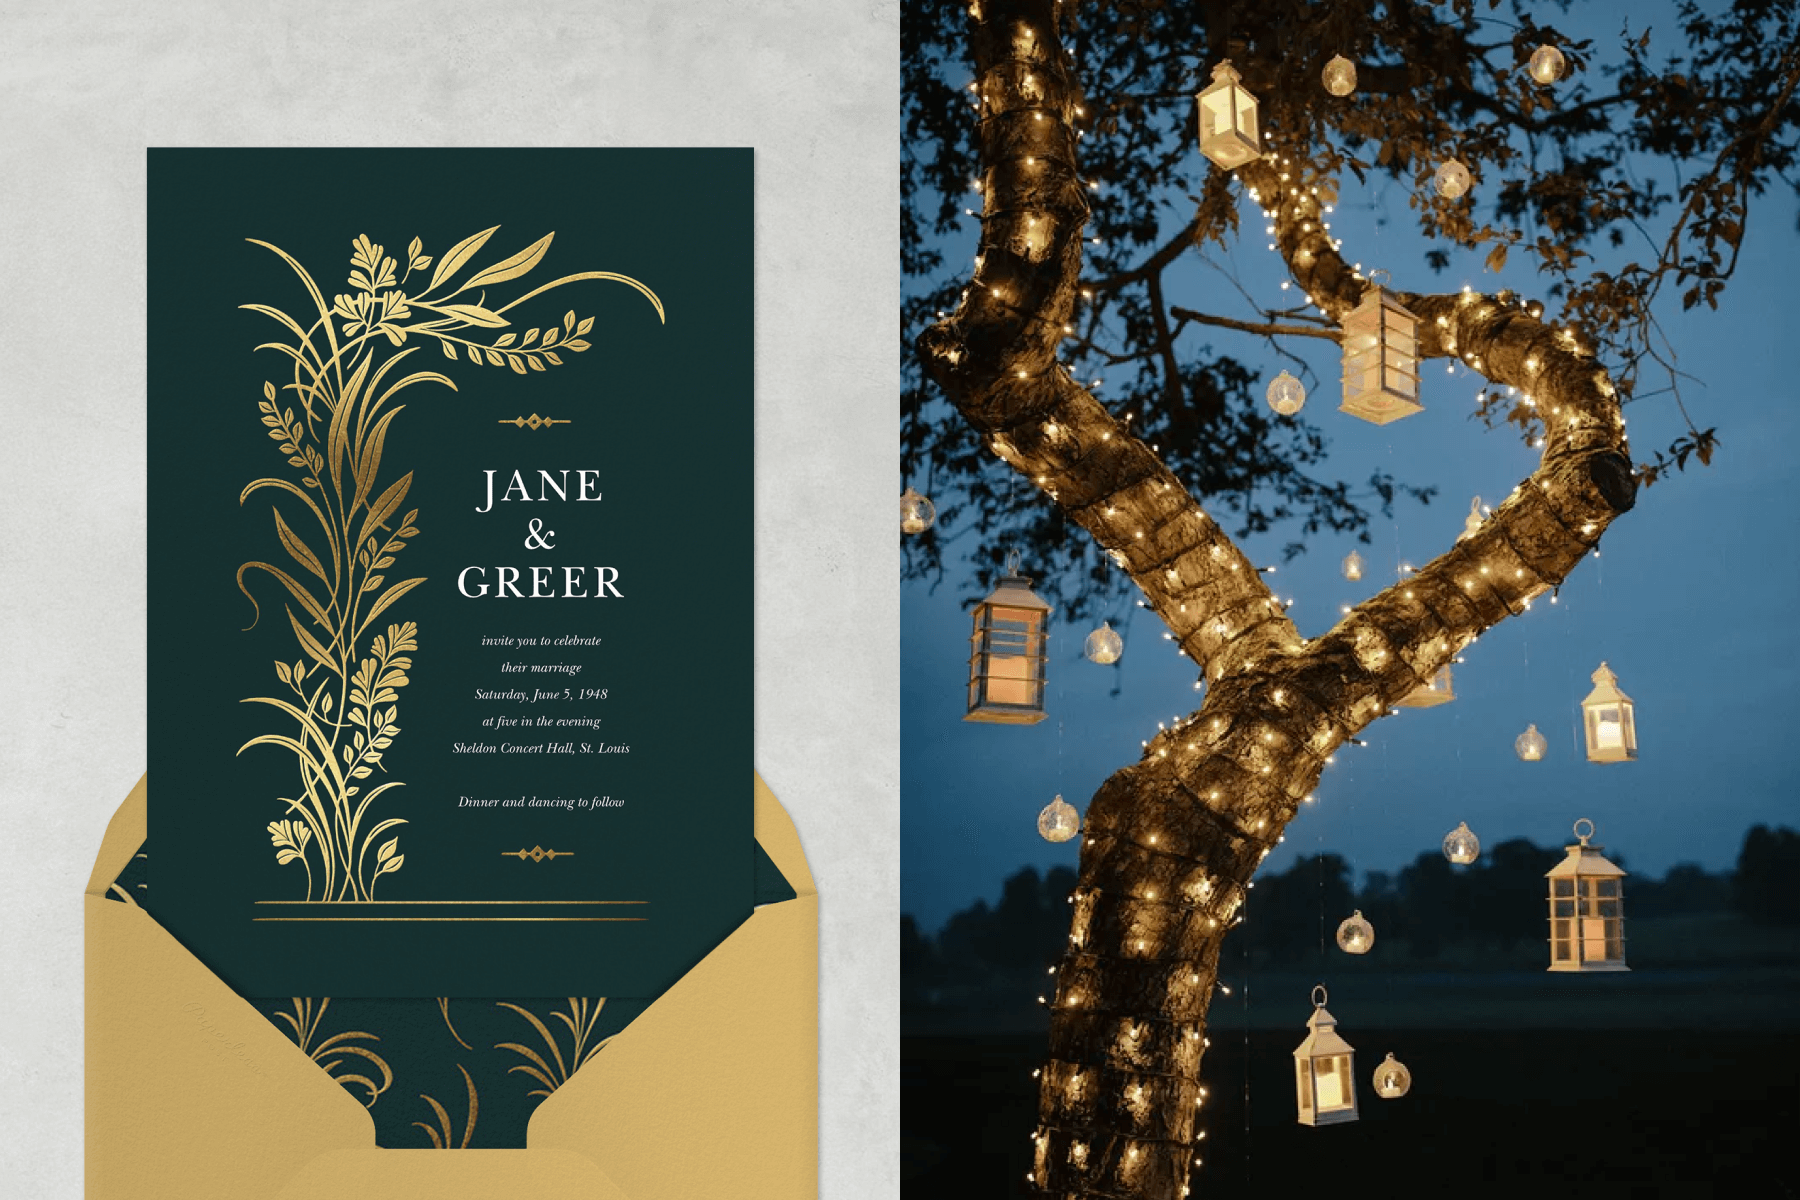 Left: A forest green wedding invitation with gold greenery to the left. Right: A tree in the evening wrapped with string lights and lanterns.